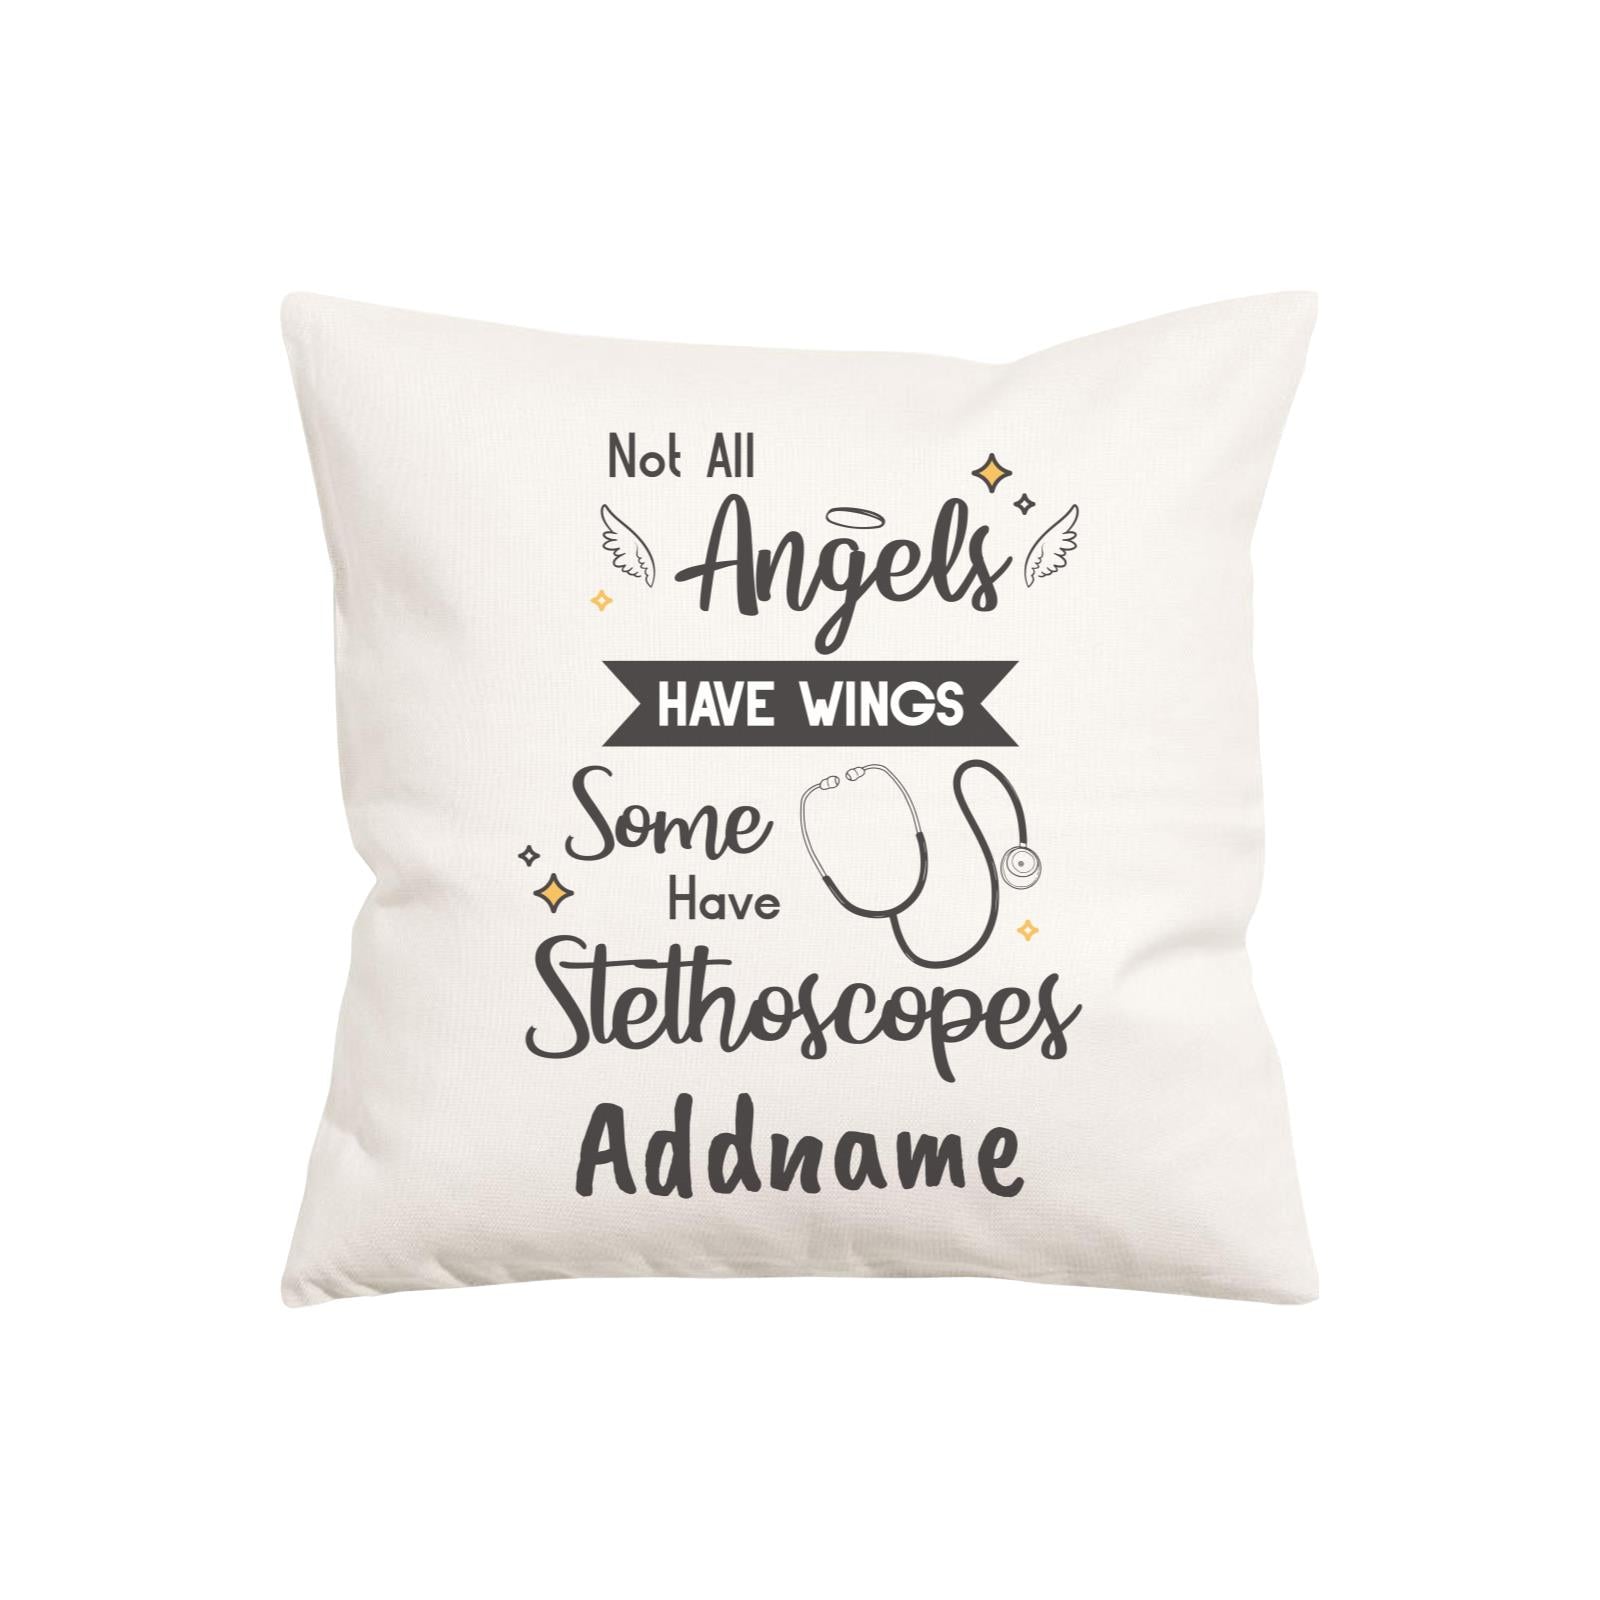 Not All Angels Have Wings, Some Have Stethoscopes Pillow Cushion